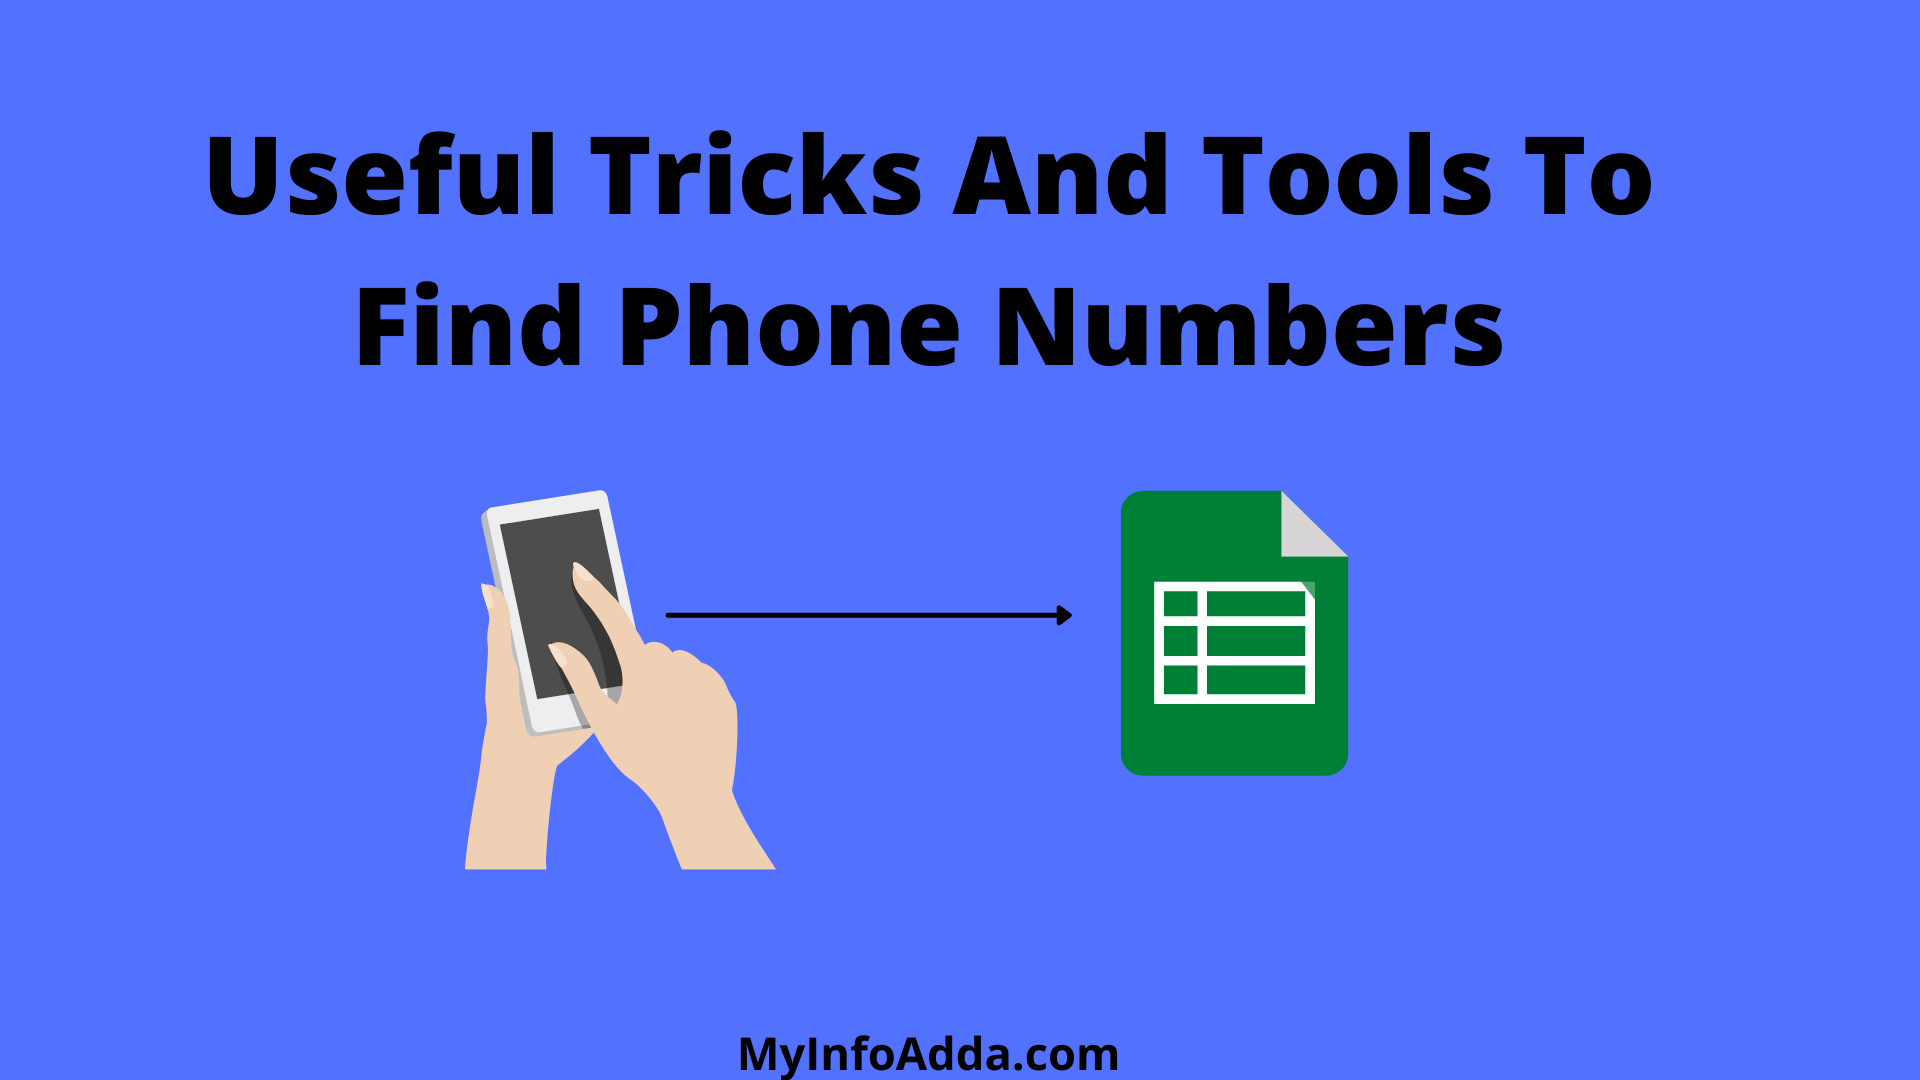 Useful Tricks And Tools To Find Phone Numbers